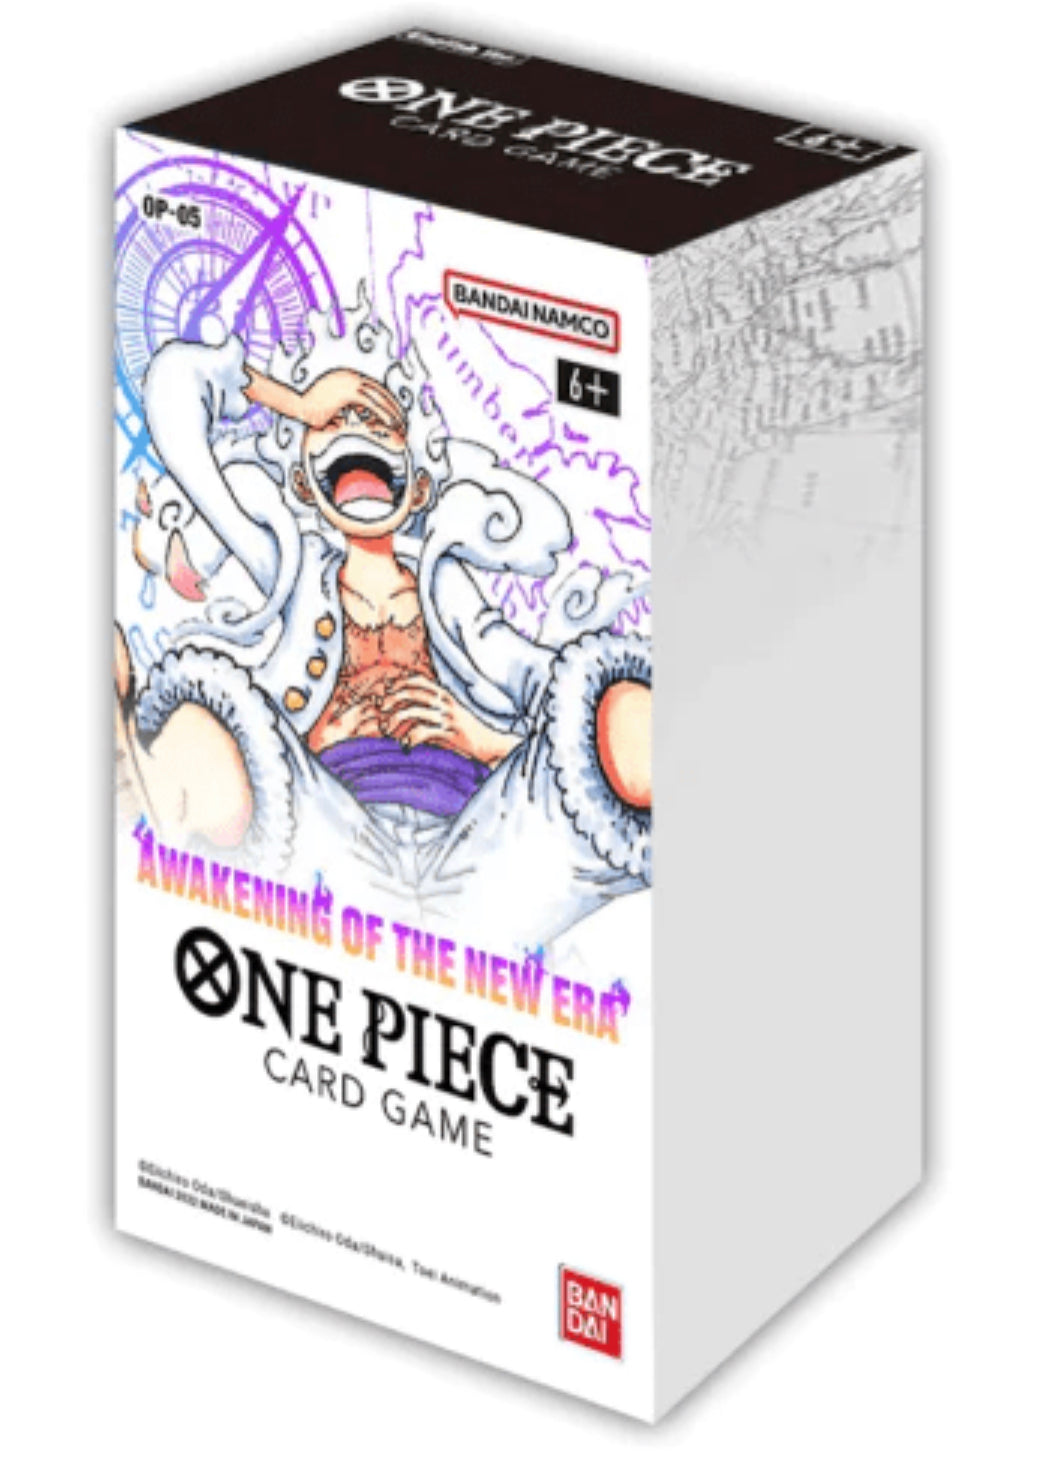 One Piece Awakening of the New Era OP-5 Double Pack